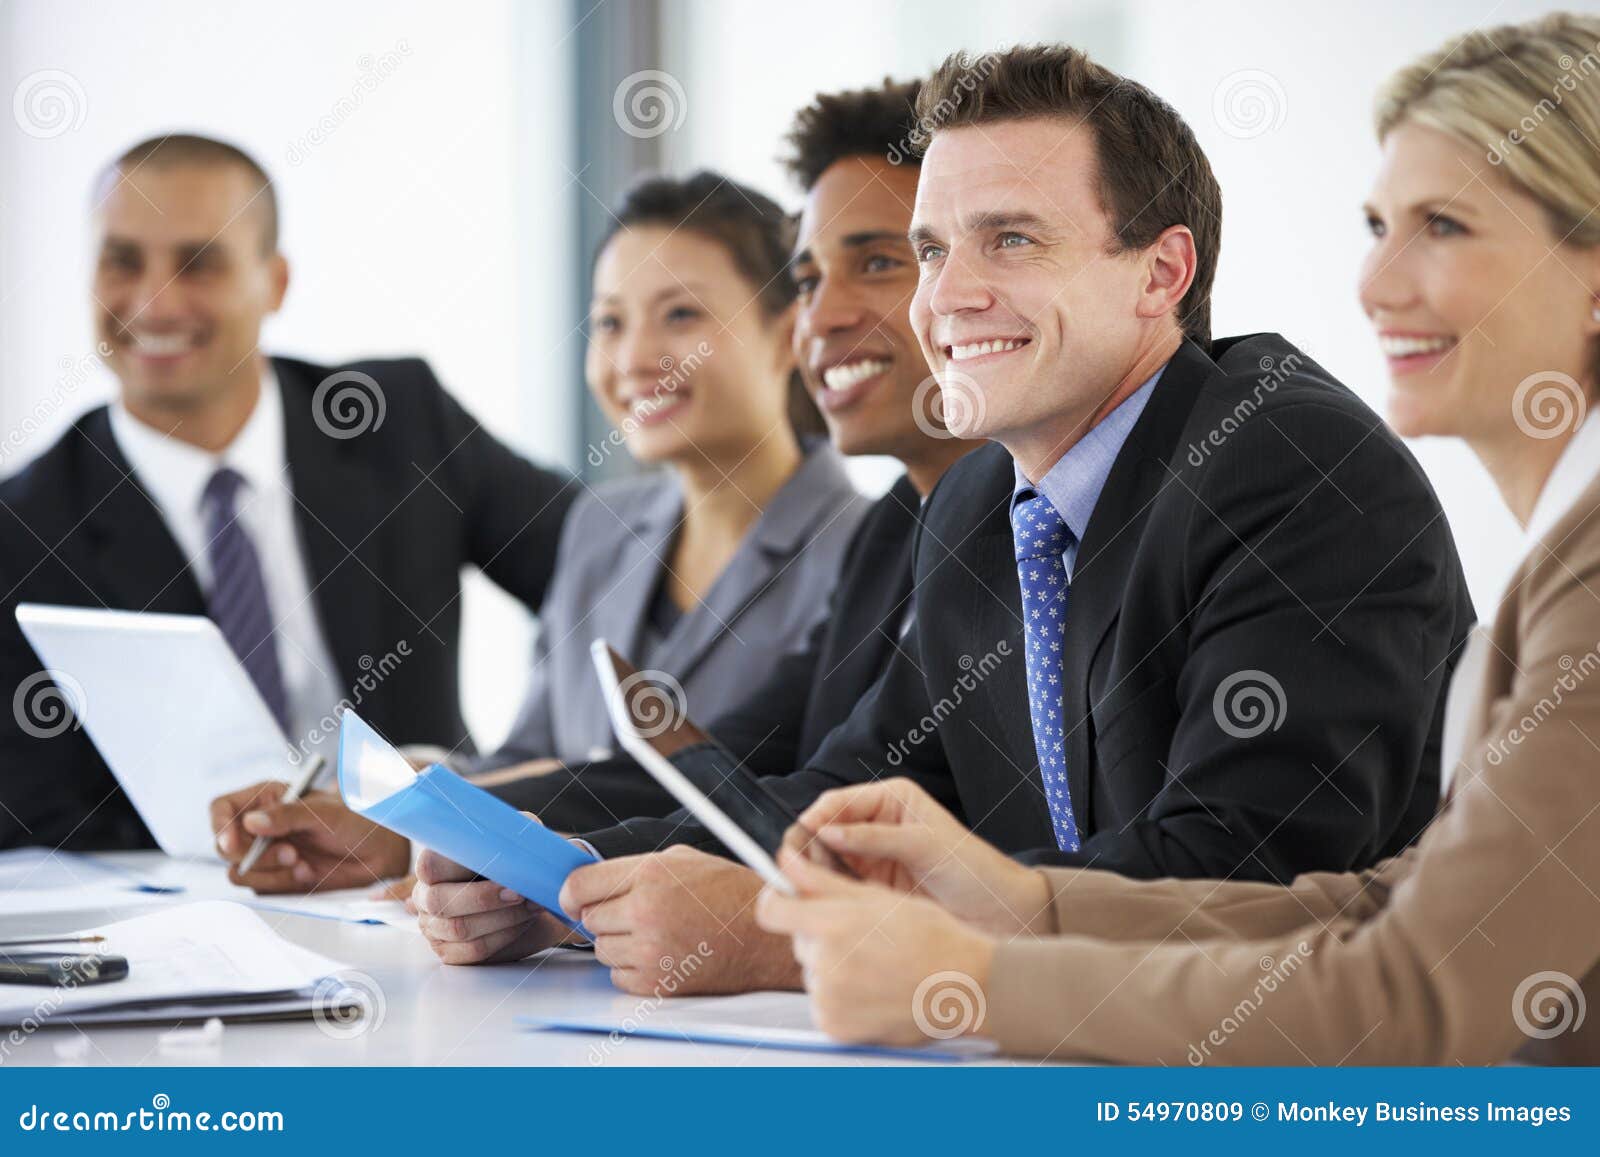 group of business people listening to colleague addressing office meeting